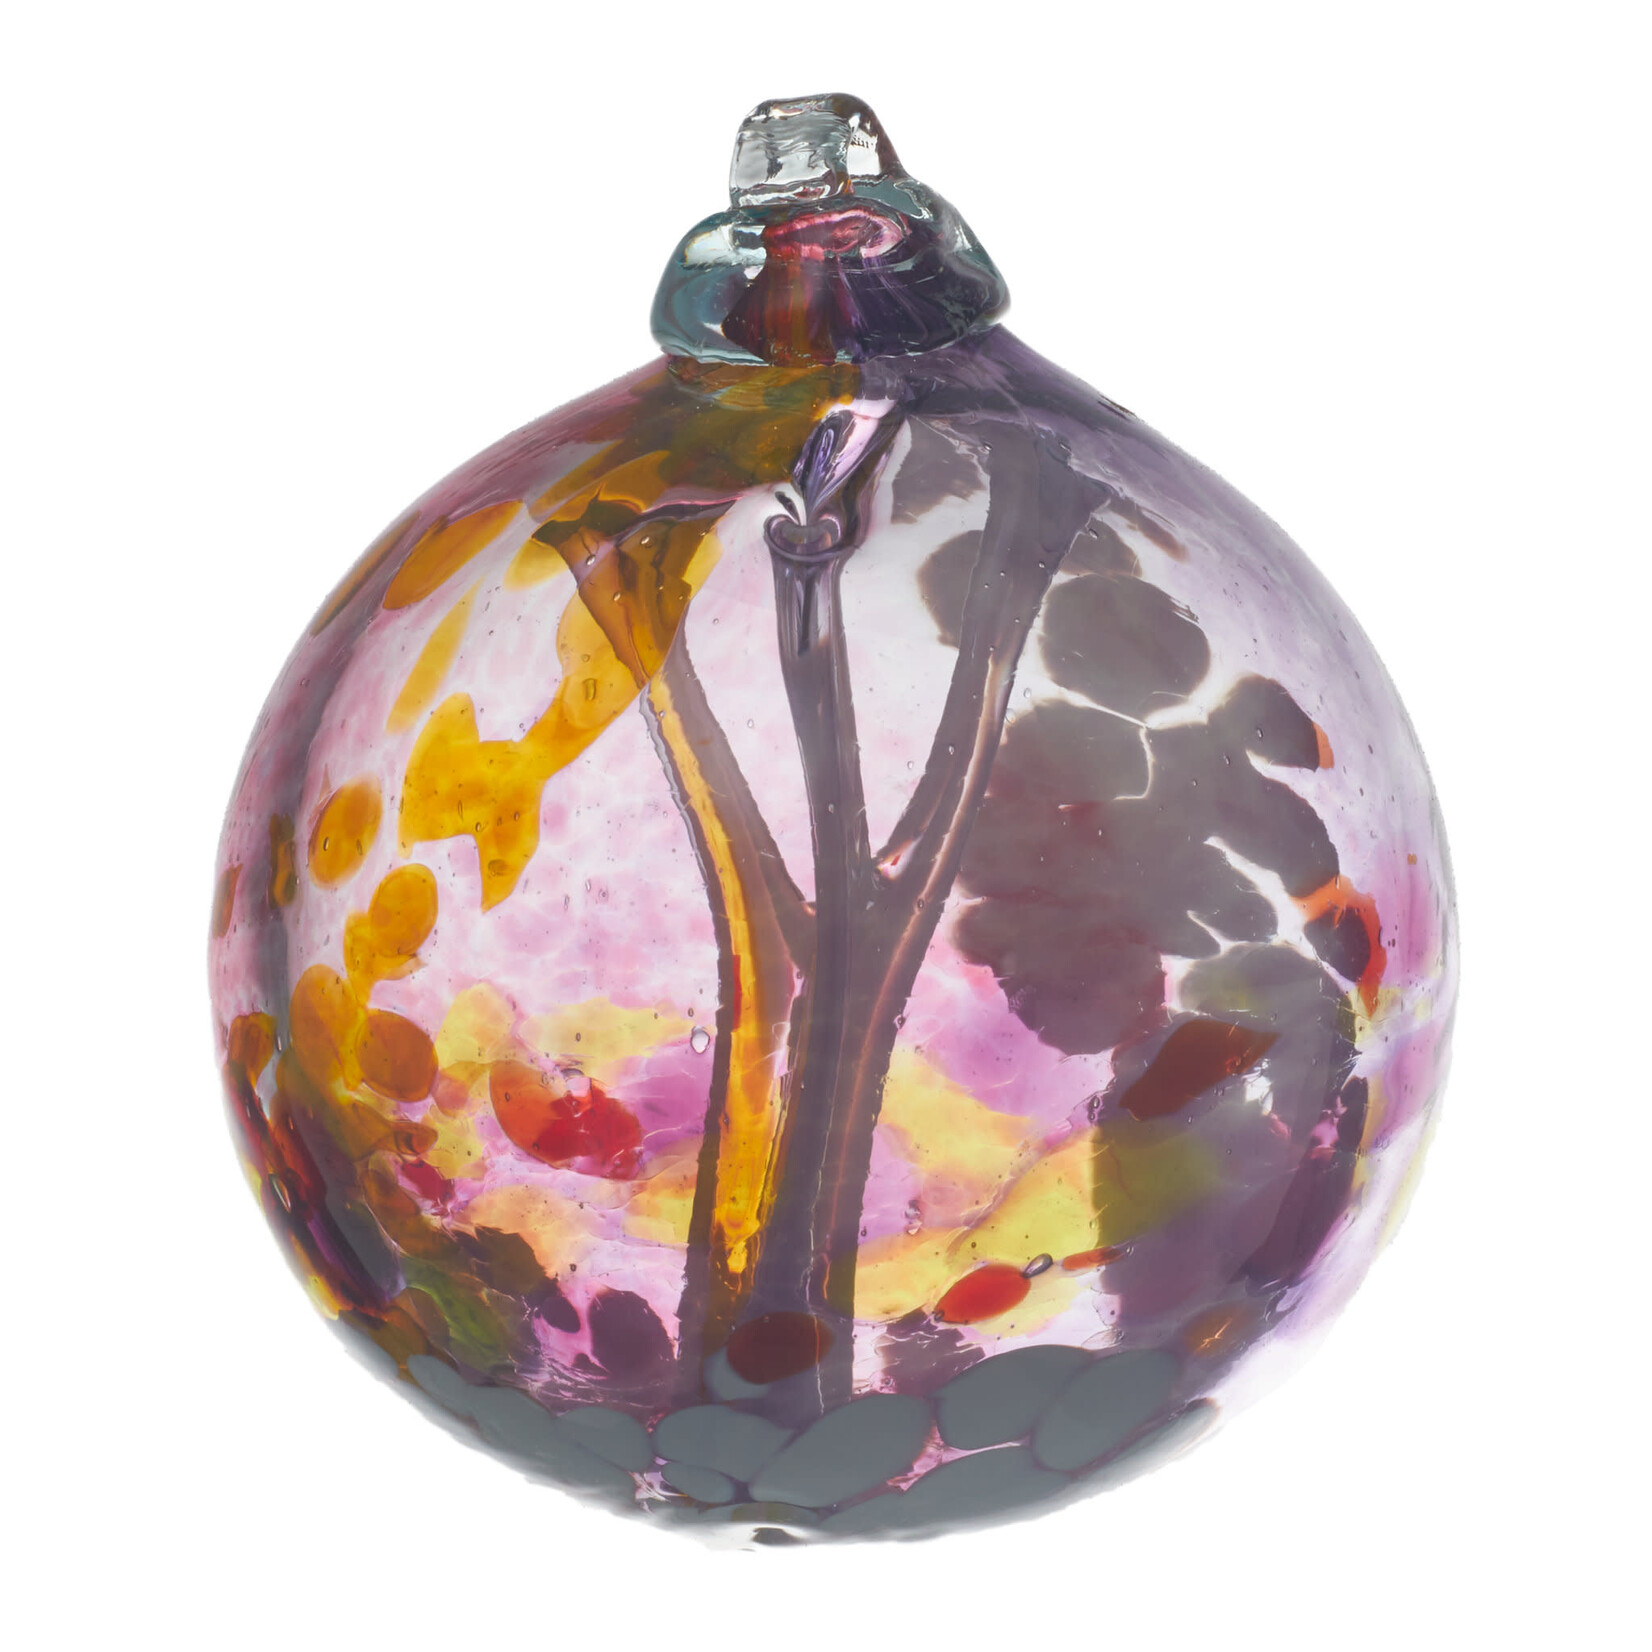 KITRAS 3" GLASS ORB - FAIRY COLLECTION